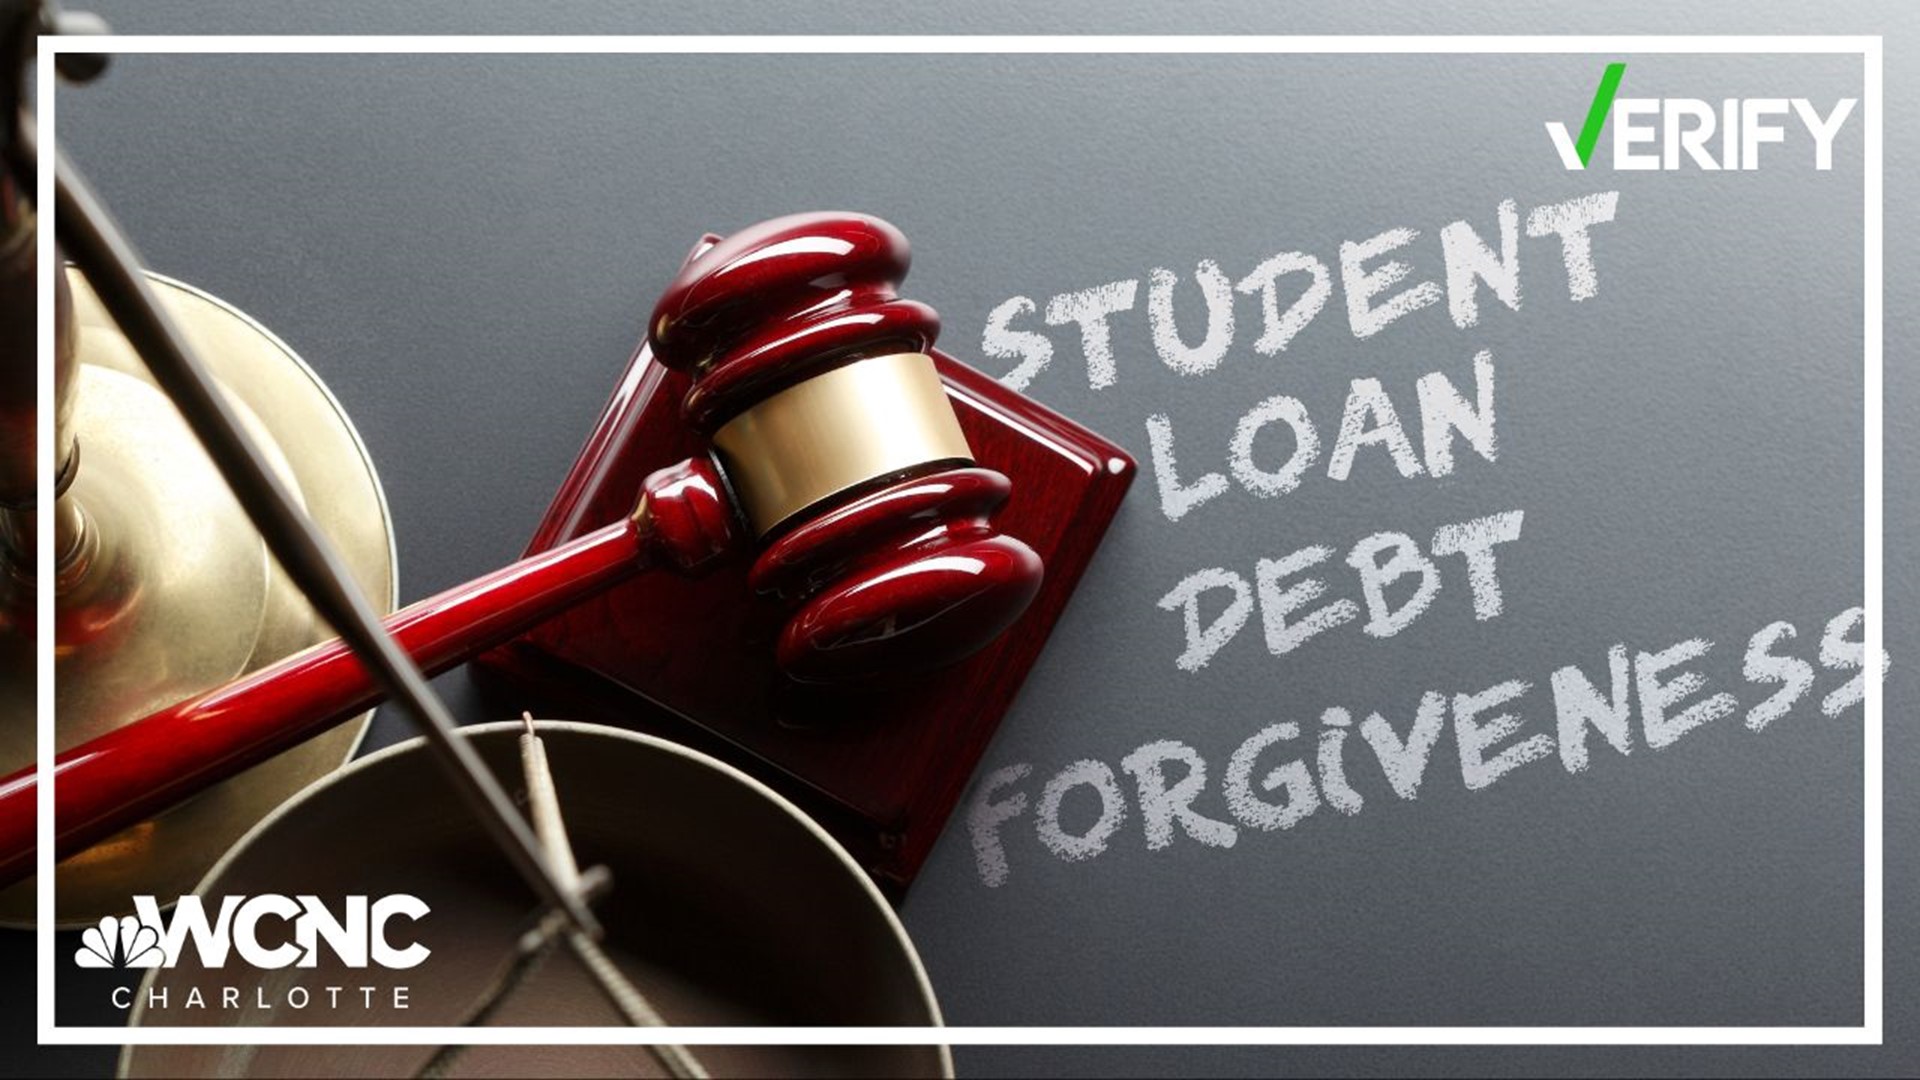 Tax season is here and many people have questions about whether they will have to pay taxes on student loan forgiveness.